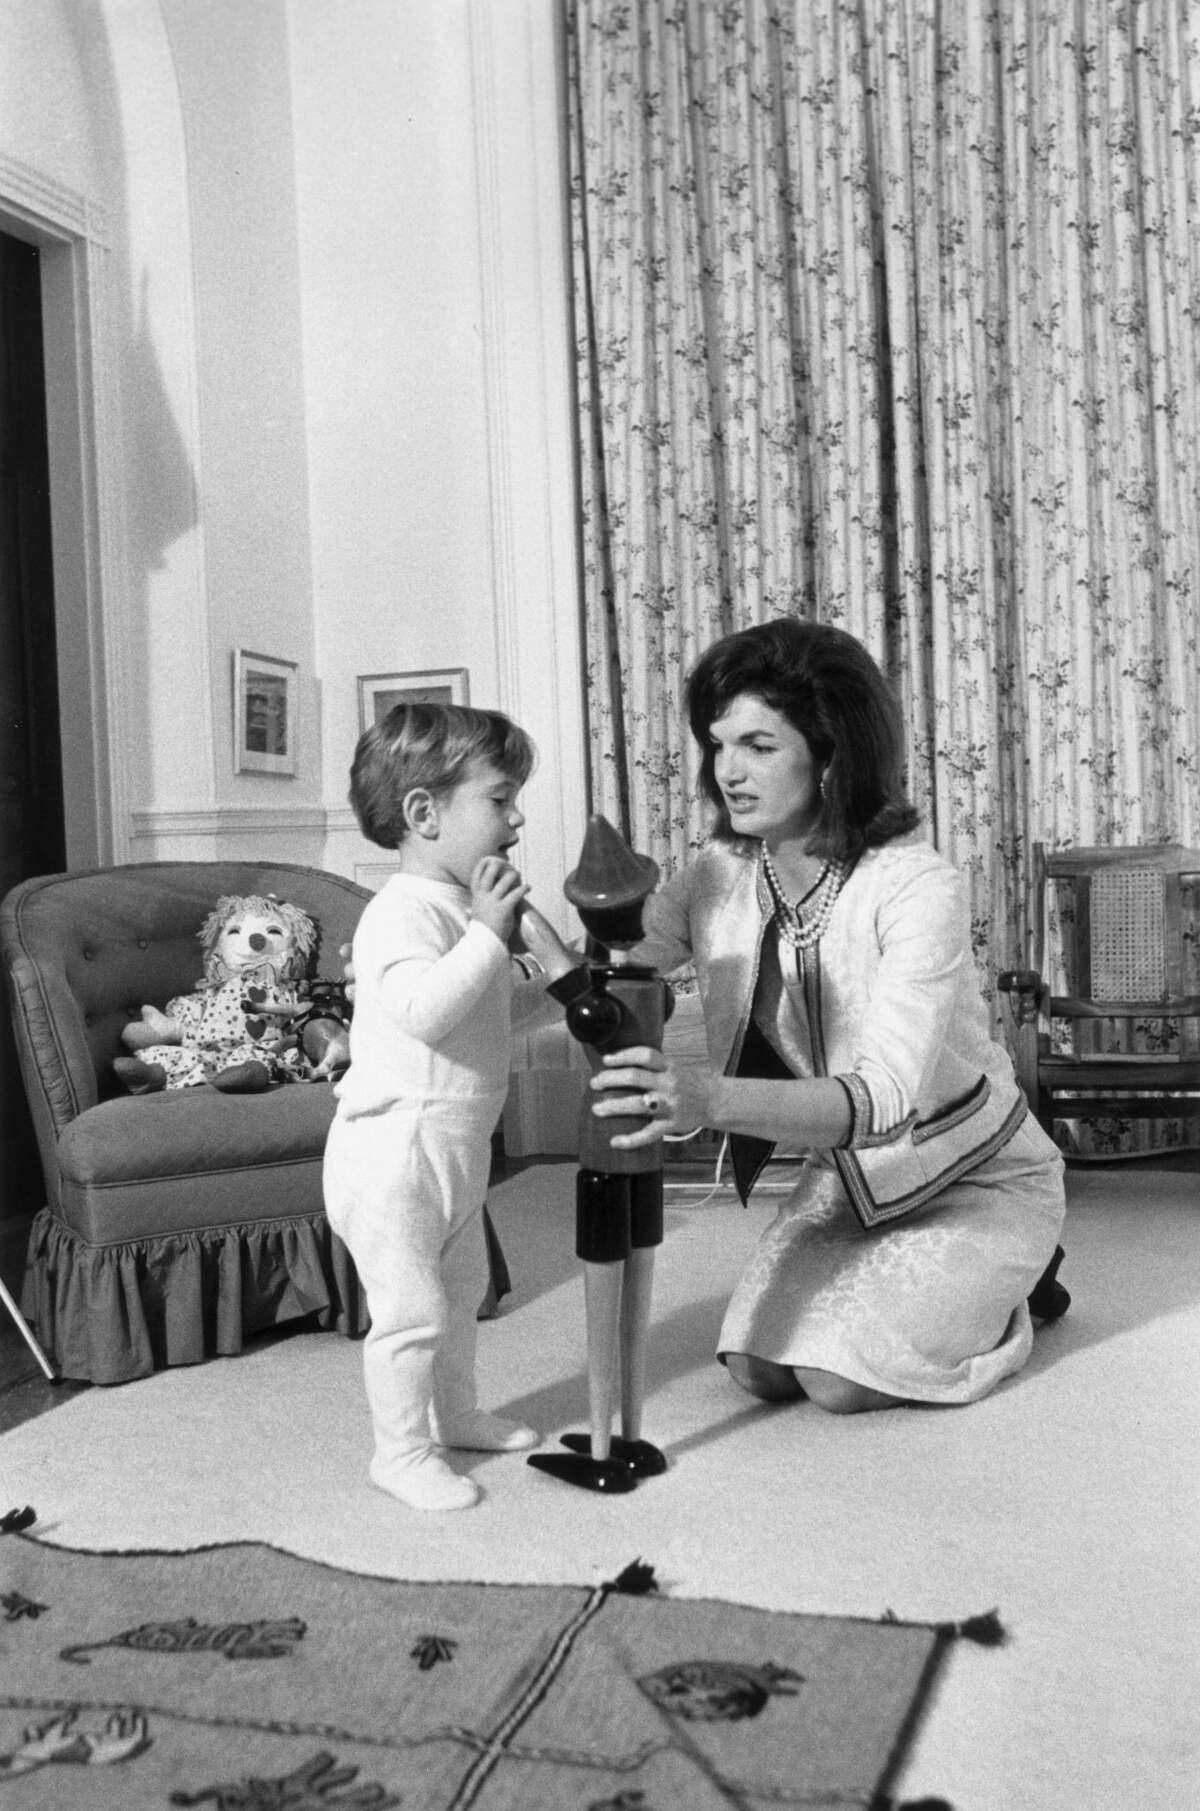 November 1962: American First Lady Jacqueline Bouvier Kennedy (1929 - 1994) kneels on the floor with her son, John F. Kennedy, Jr. (1960 - 1999), playing with a wooden toy figure, inside the White House, Washington, D.C. There is a rag doll on the chair behind them. (Photo by John F. Kennedy Library/John F. Kennedy Library/Getty Images)